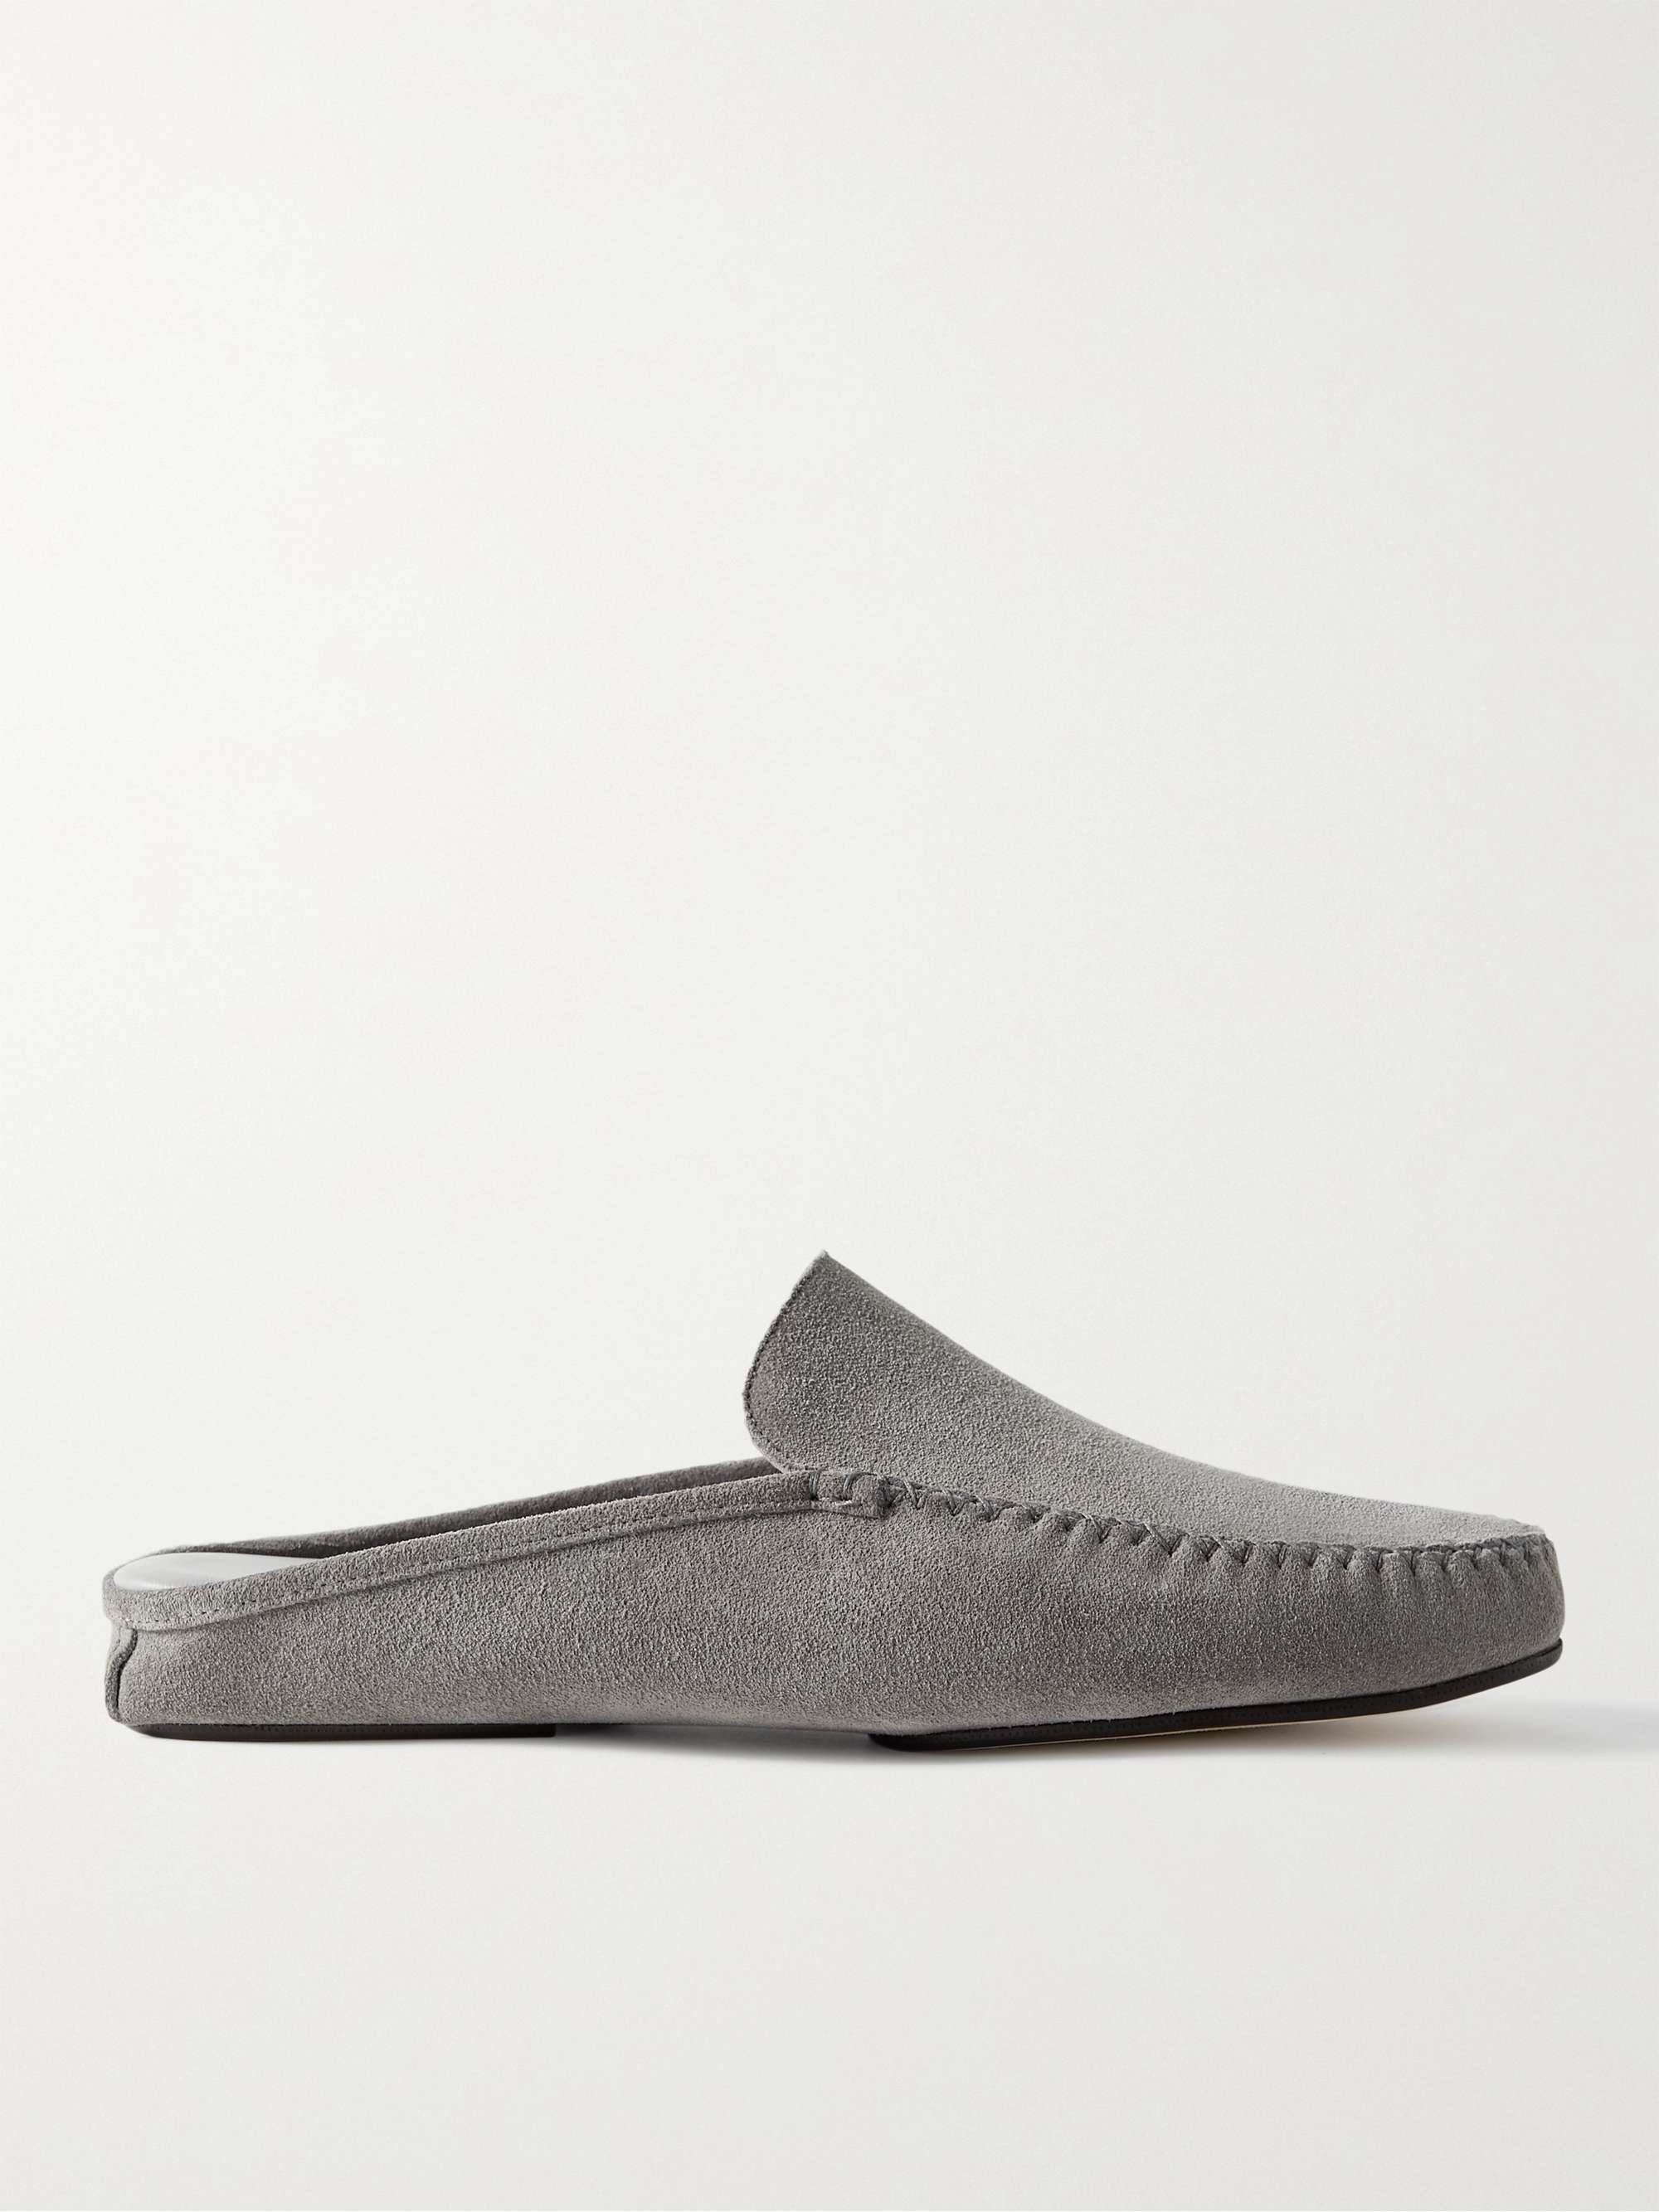 Thom Browne Hector Leather-trimmed Checked Wool-flannel Slippers in Grey for Men Mens Shoes Slip-on shoes Slippers 